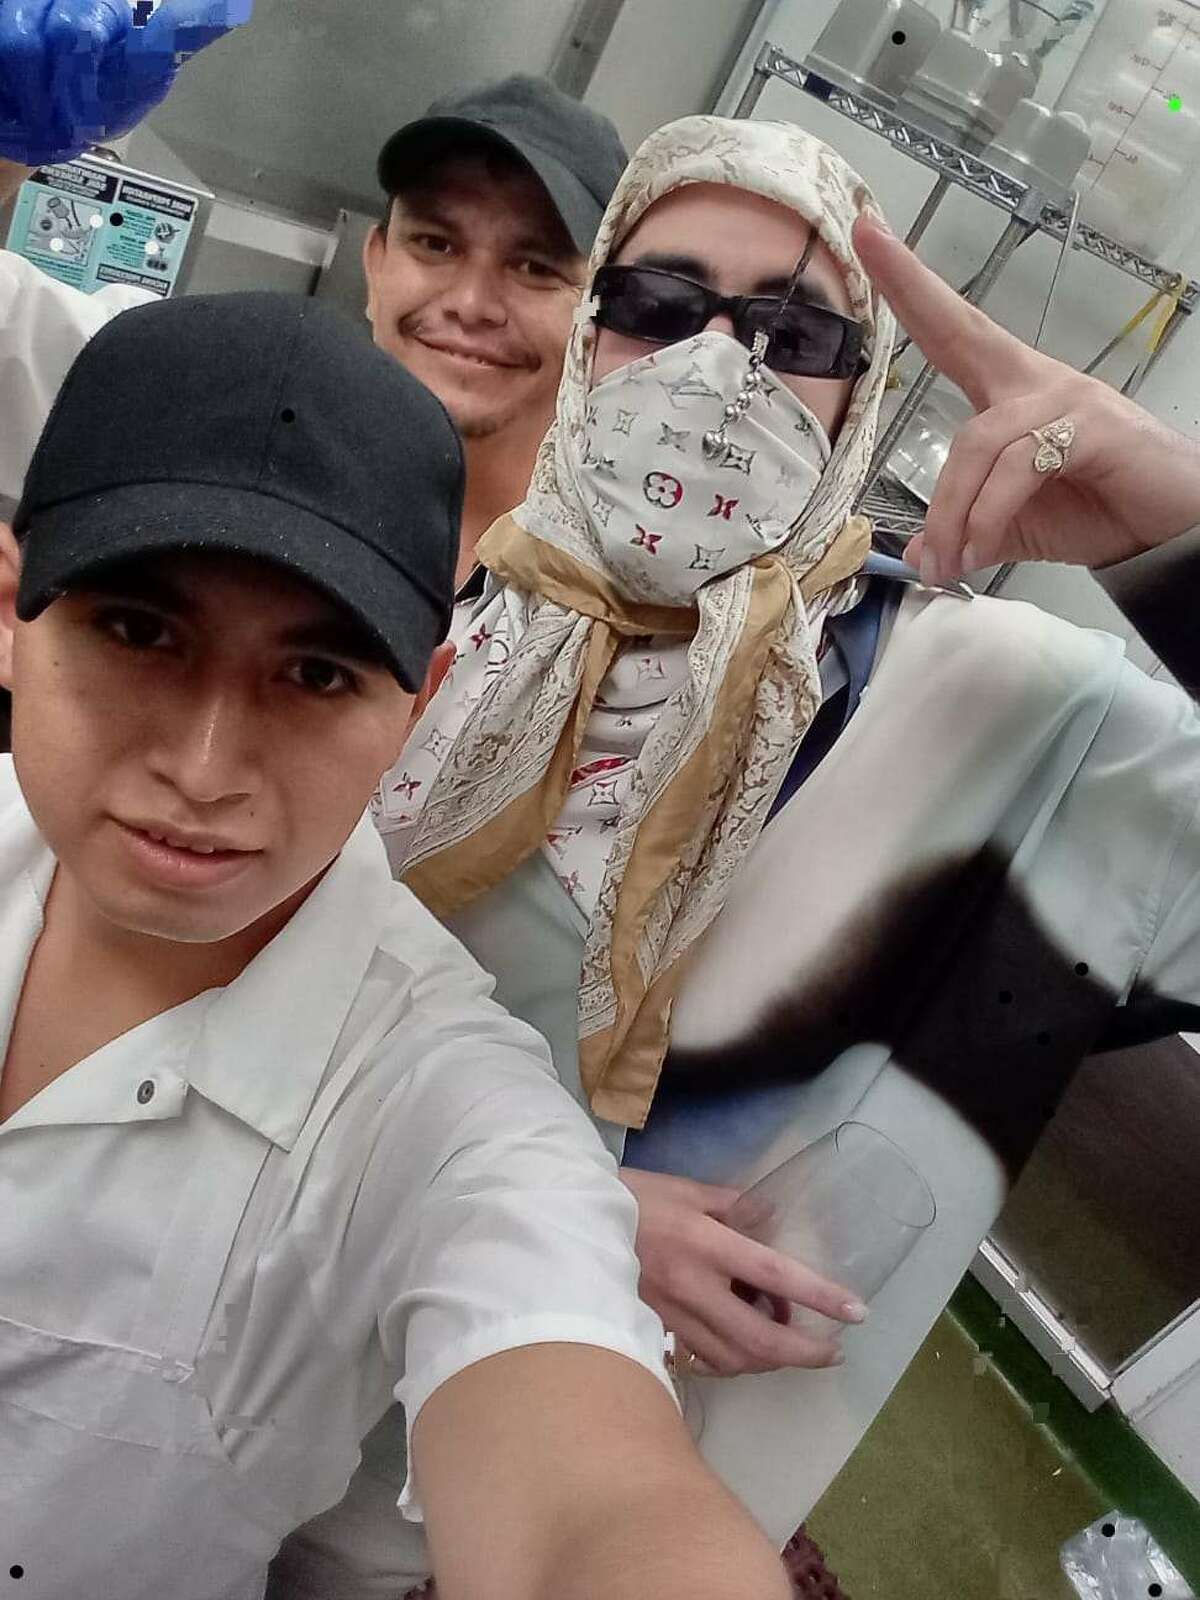 Bad Bunny (right) posed for photos with Deybith Hernandez (front) and David Chavarria (back) at Sol Food in San Rafael while in the Bay Area.